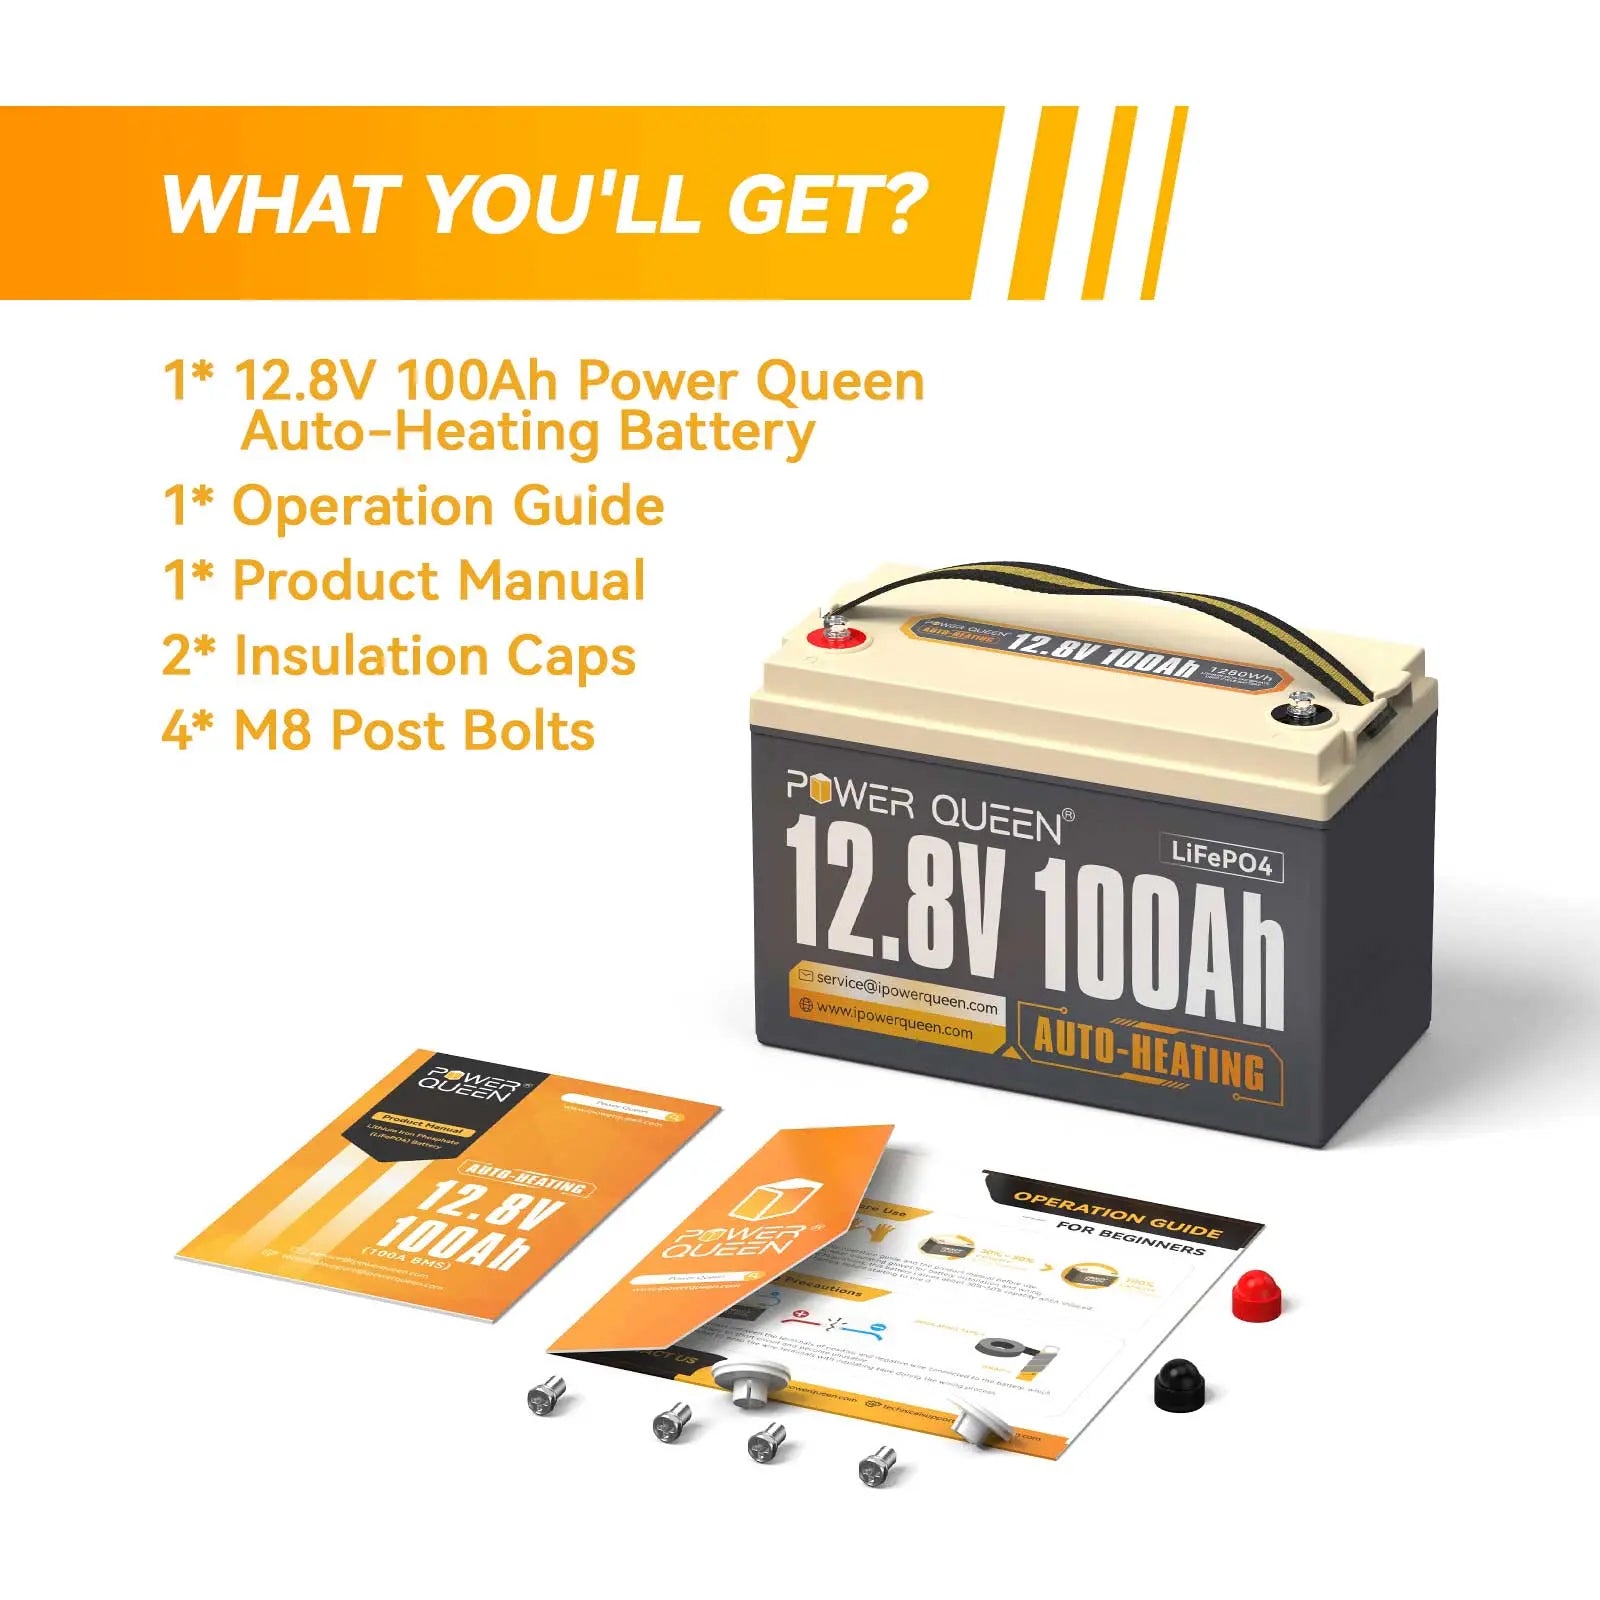 Power Queen 12V 100Ah Self-Heating LiFePO4 Battery